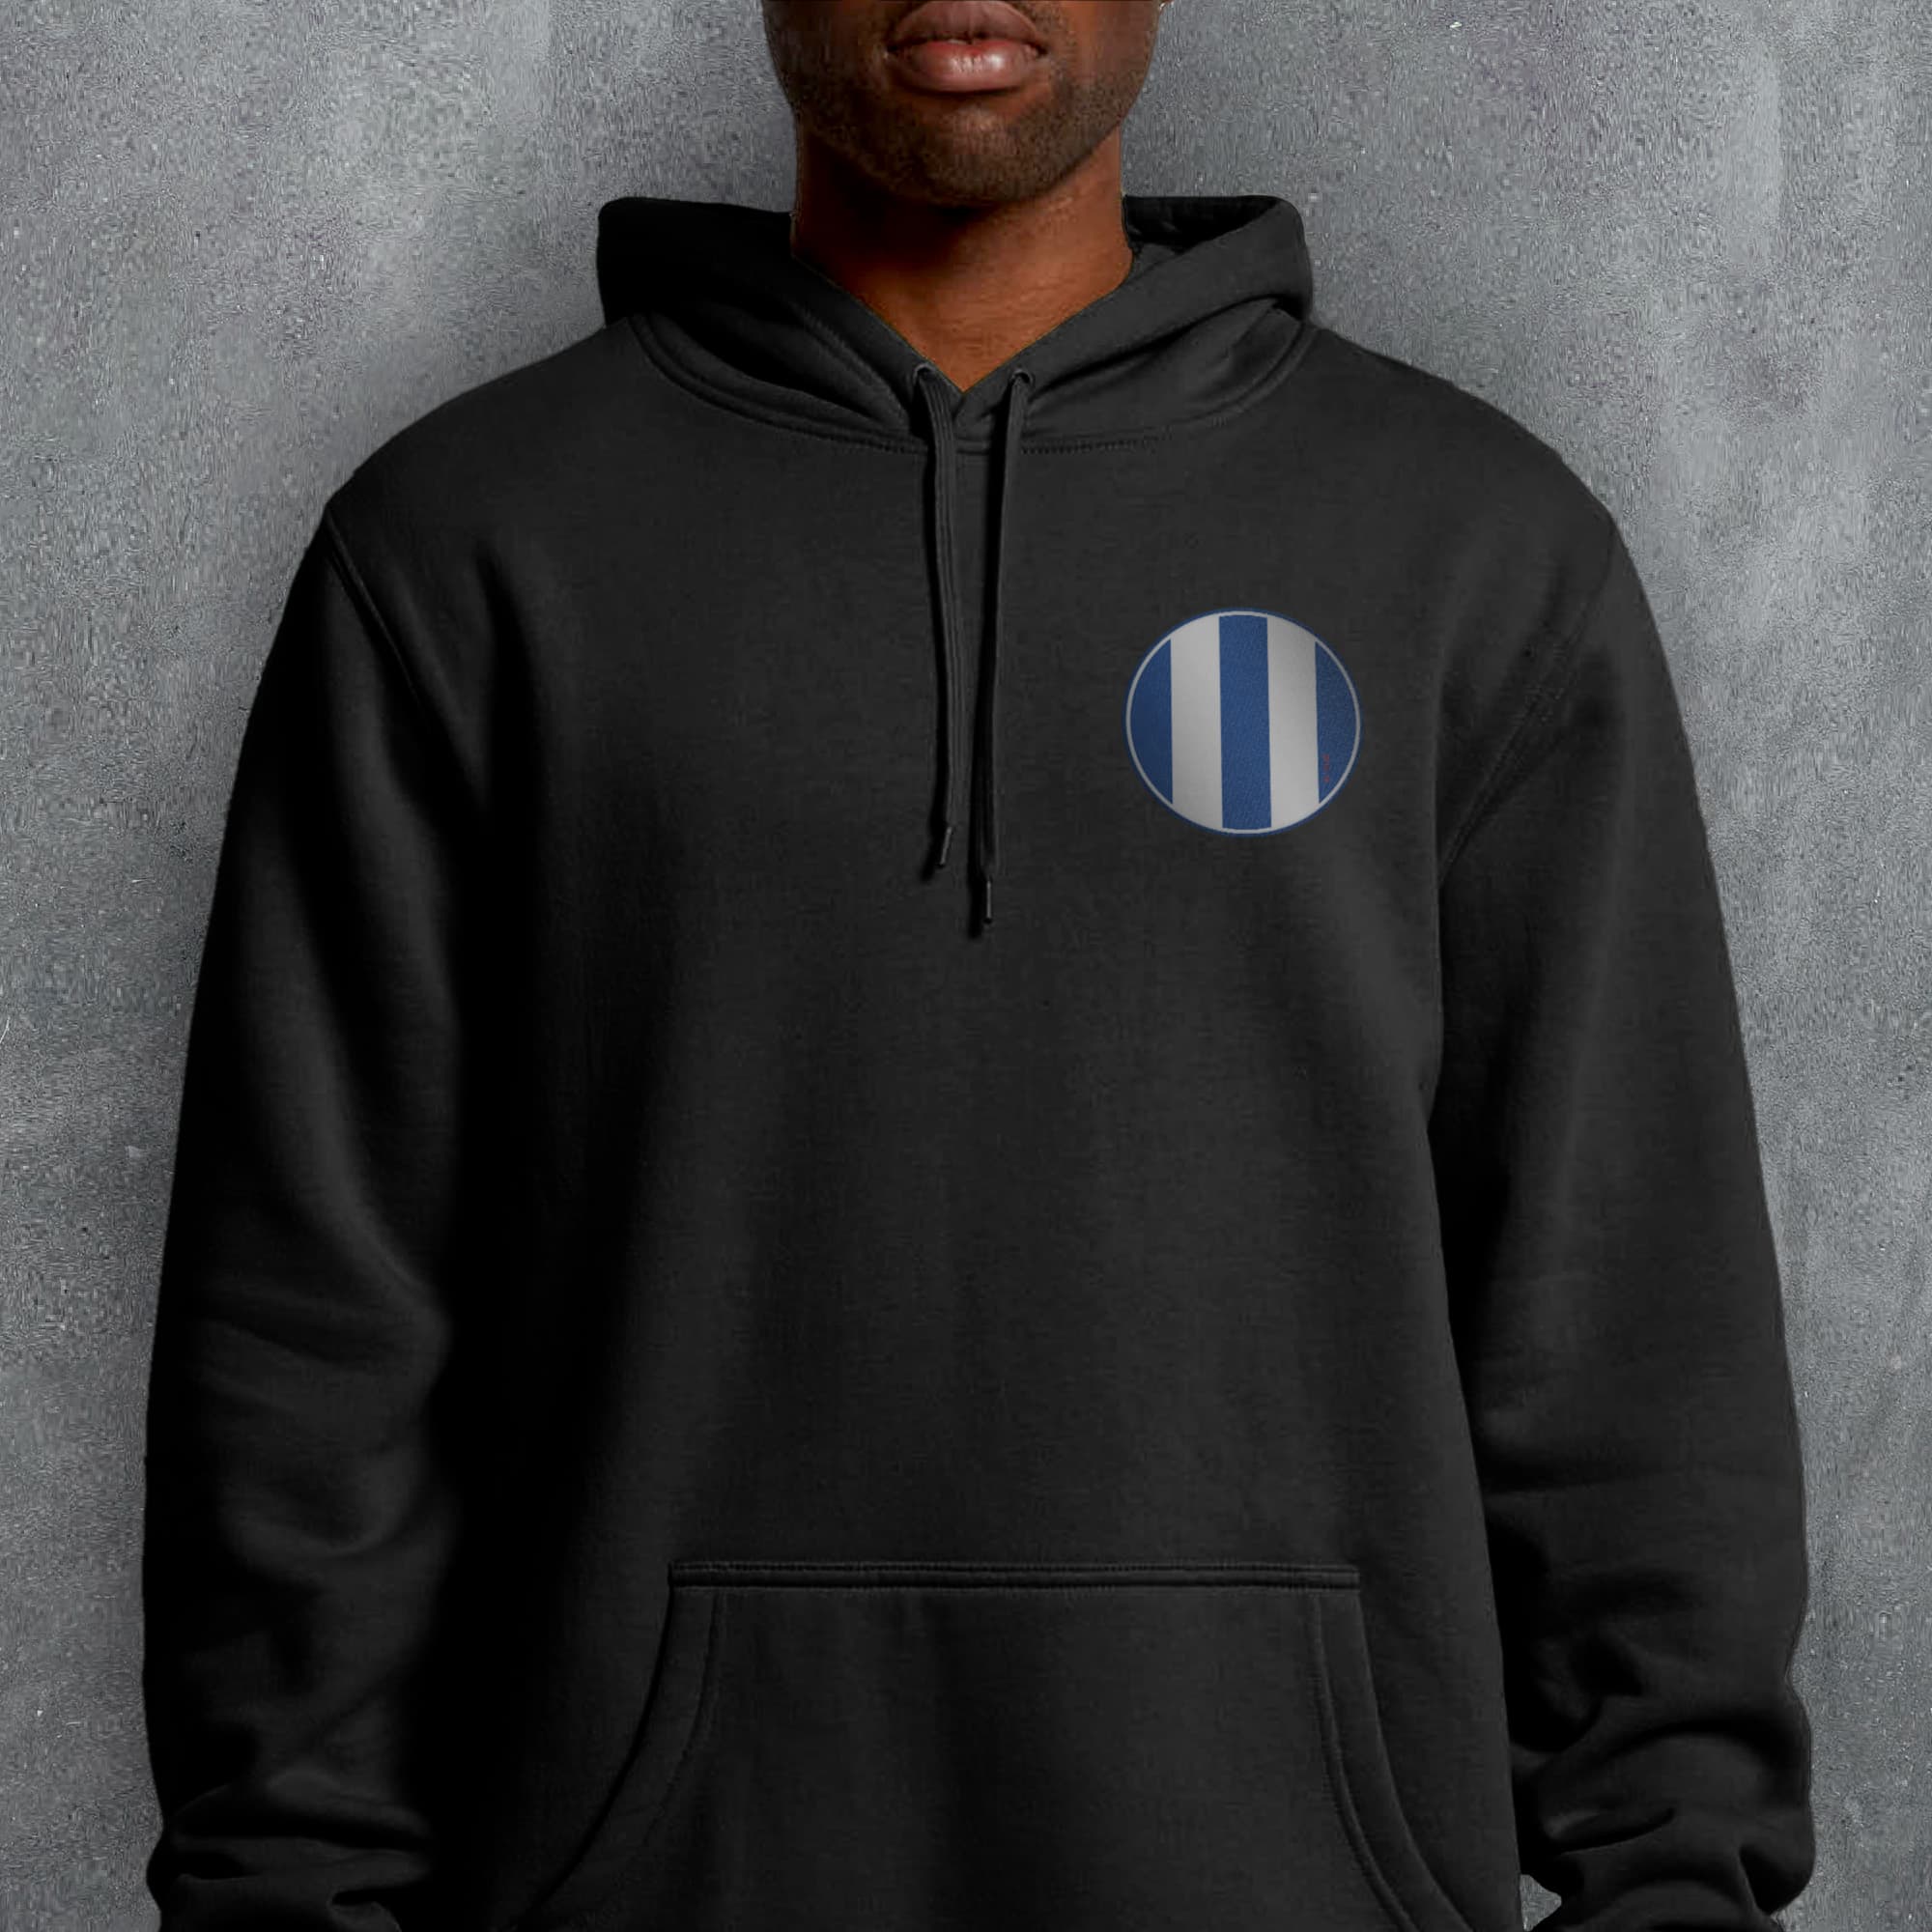 a man wearing a black hoodie with a blue and white stripe on it